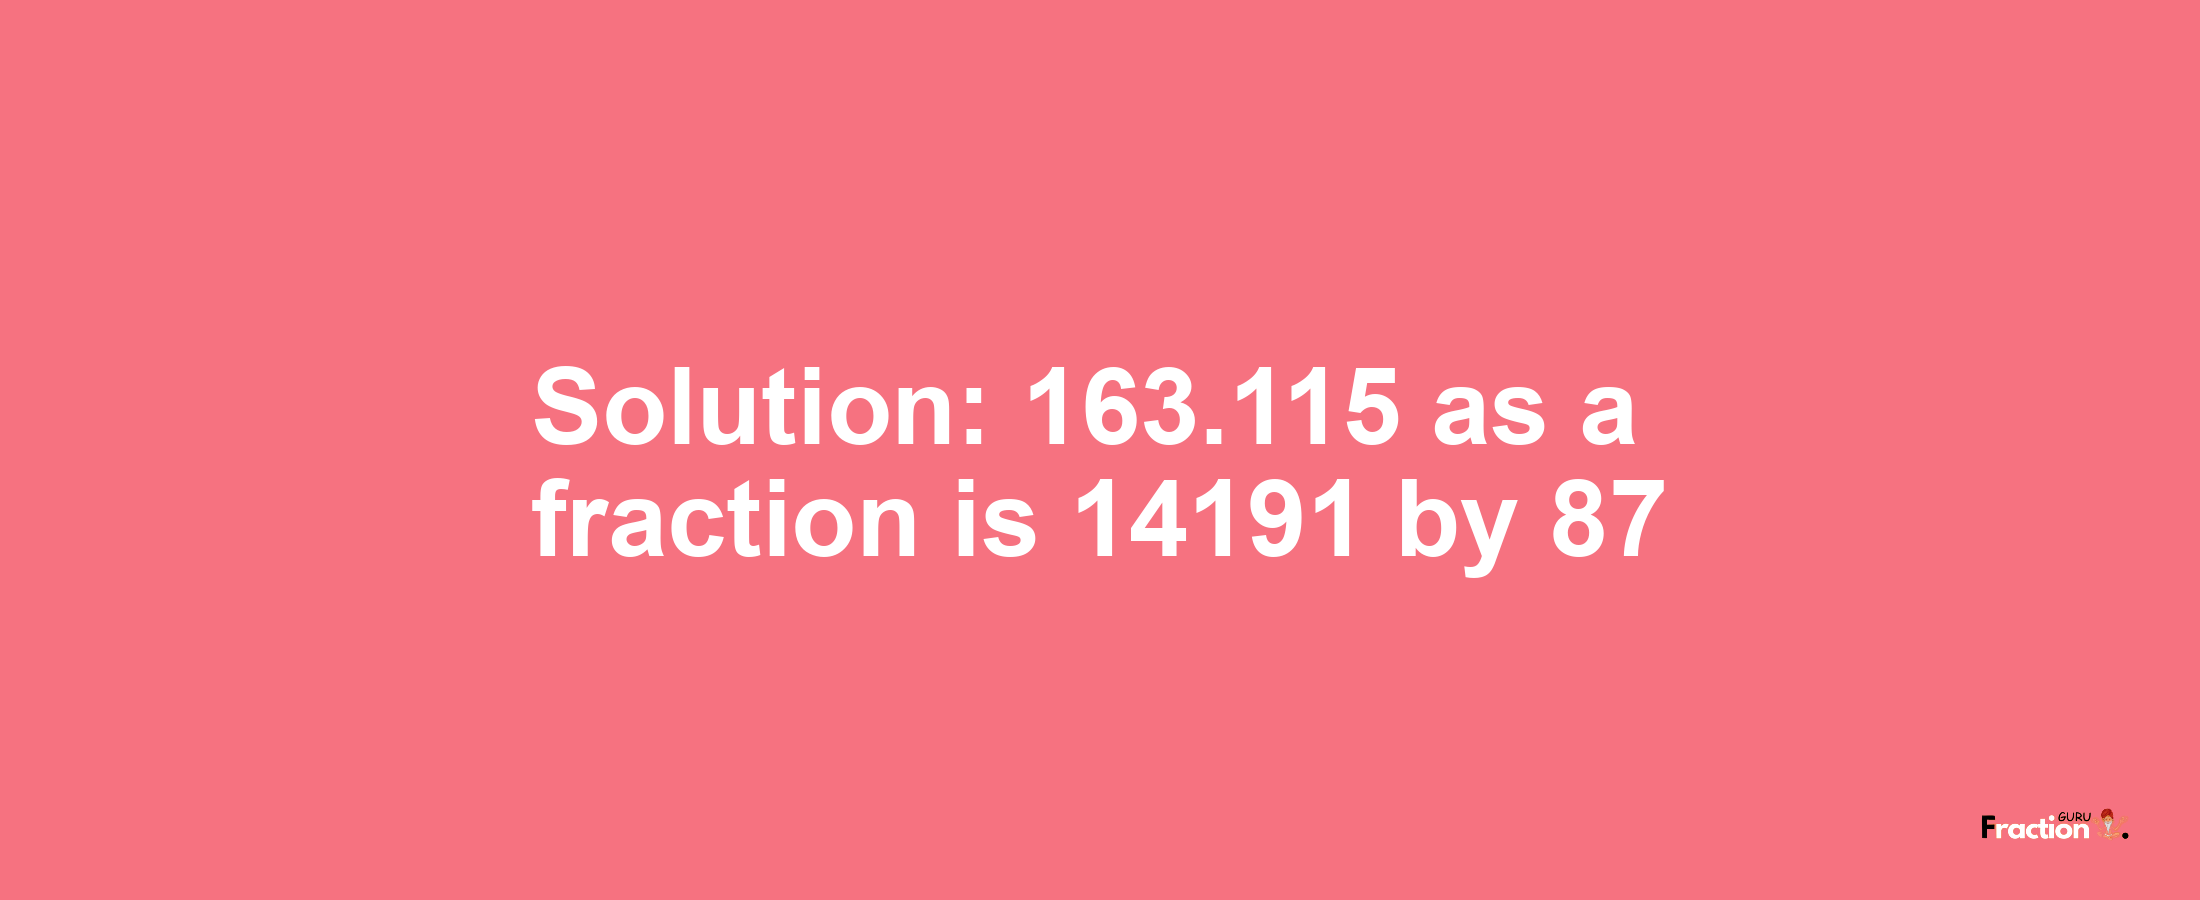 Solution:163.115 as a fraction is 14191/87